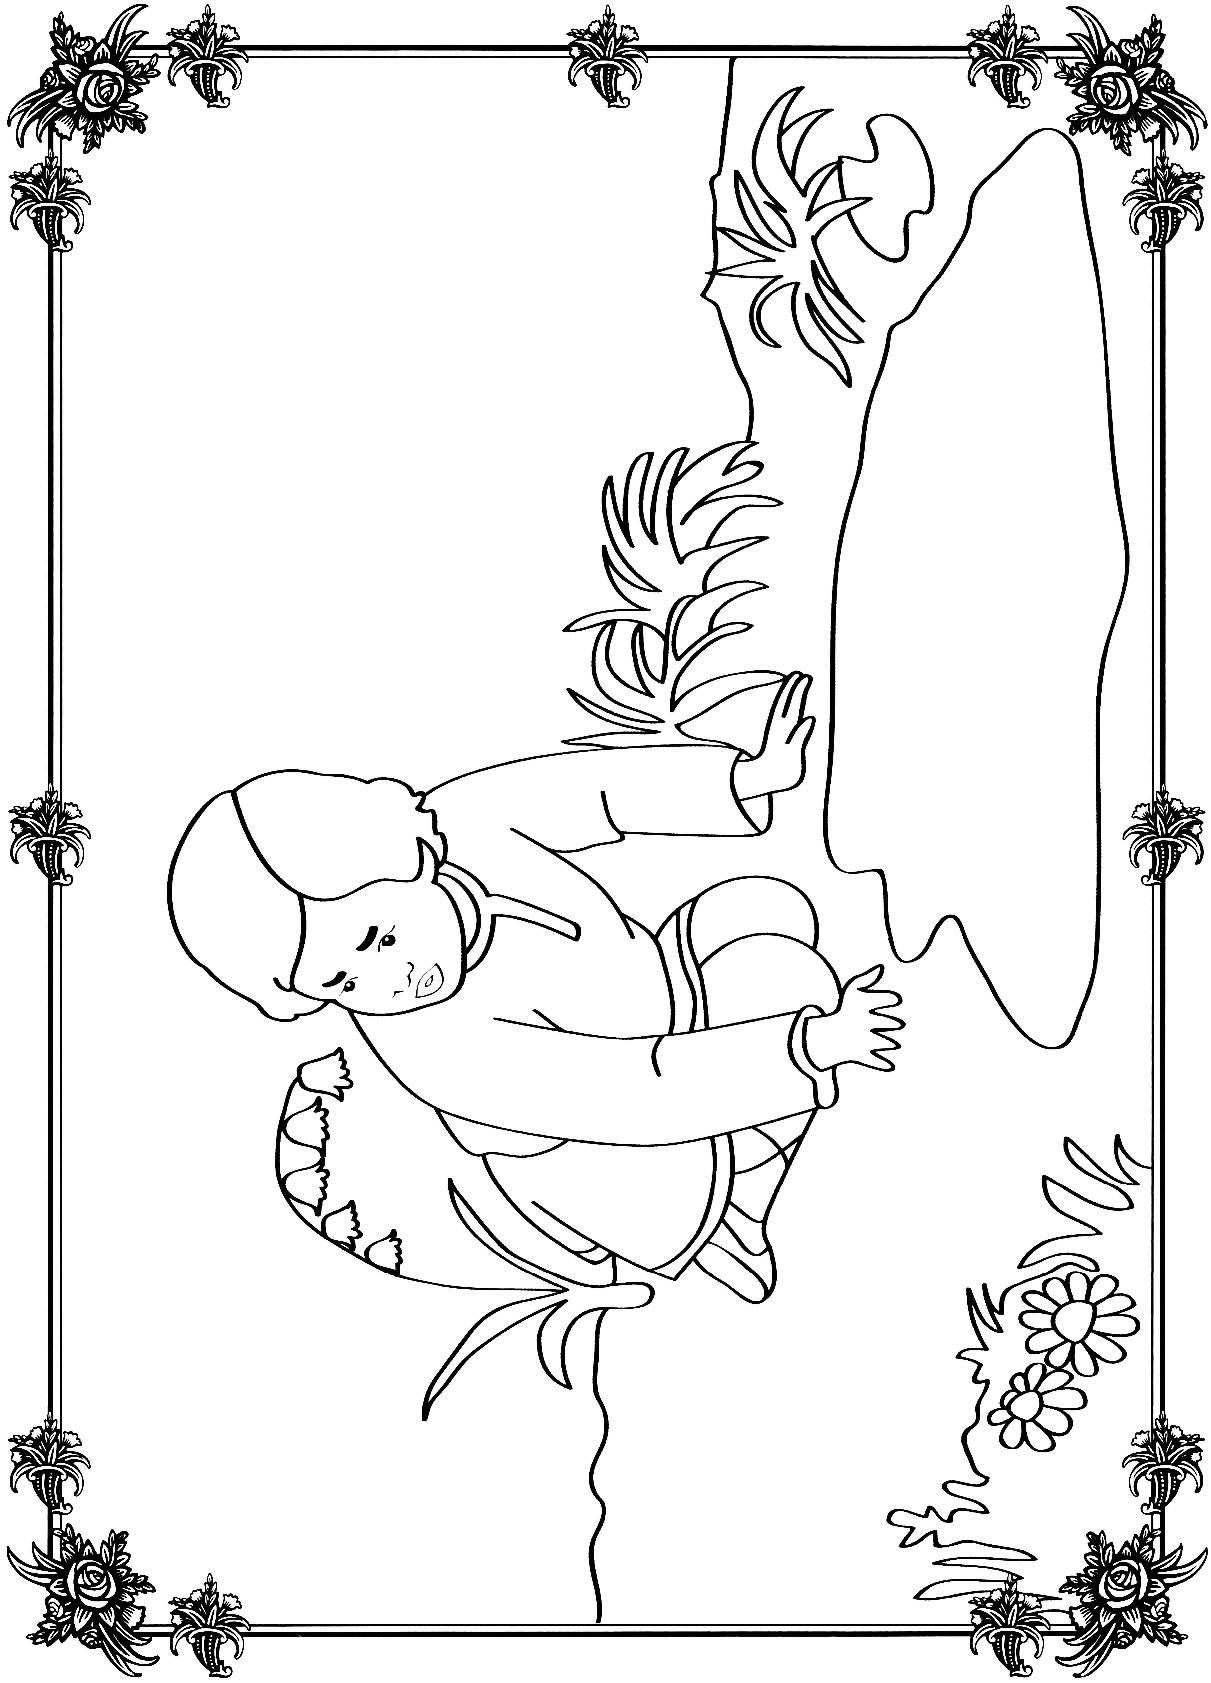 Coloring coloring pages the fairy tale Alyonushka and brother Ivanushka Ivan puddles near the tale Sister Alyonushka and brother Ivanushka